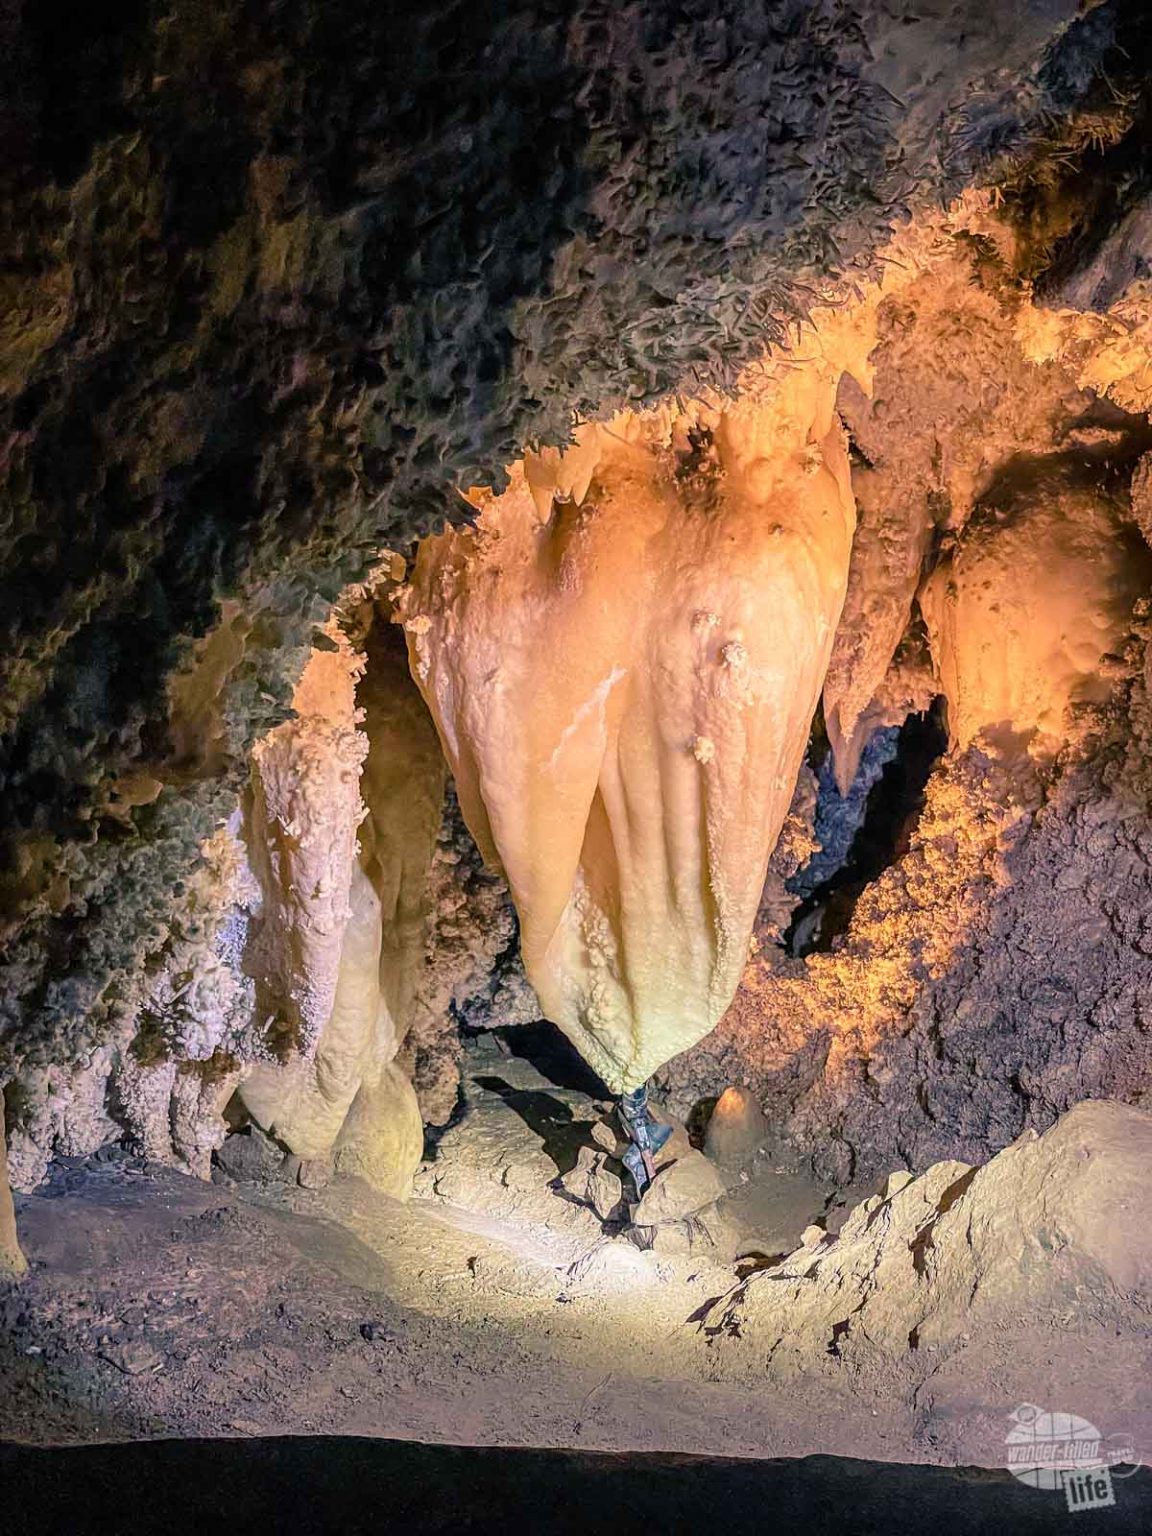 How to Visit Timpanogos Cave National Monument